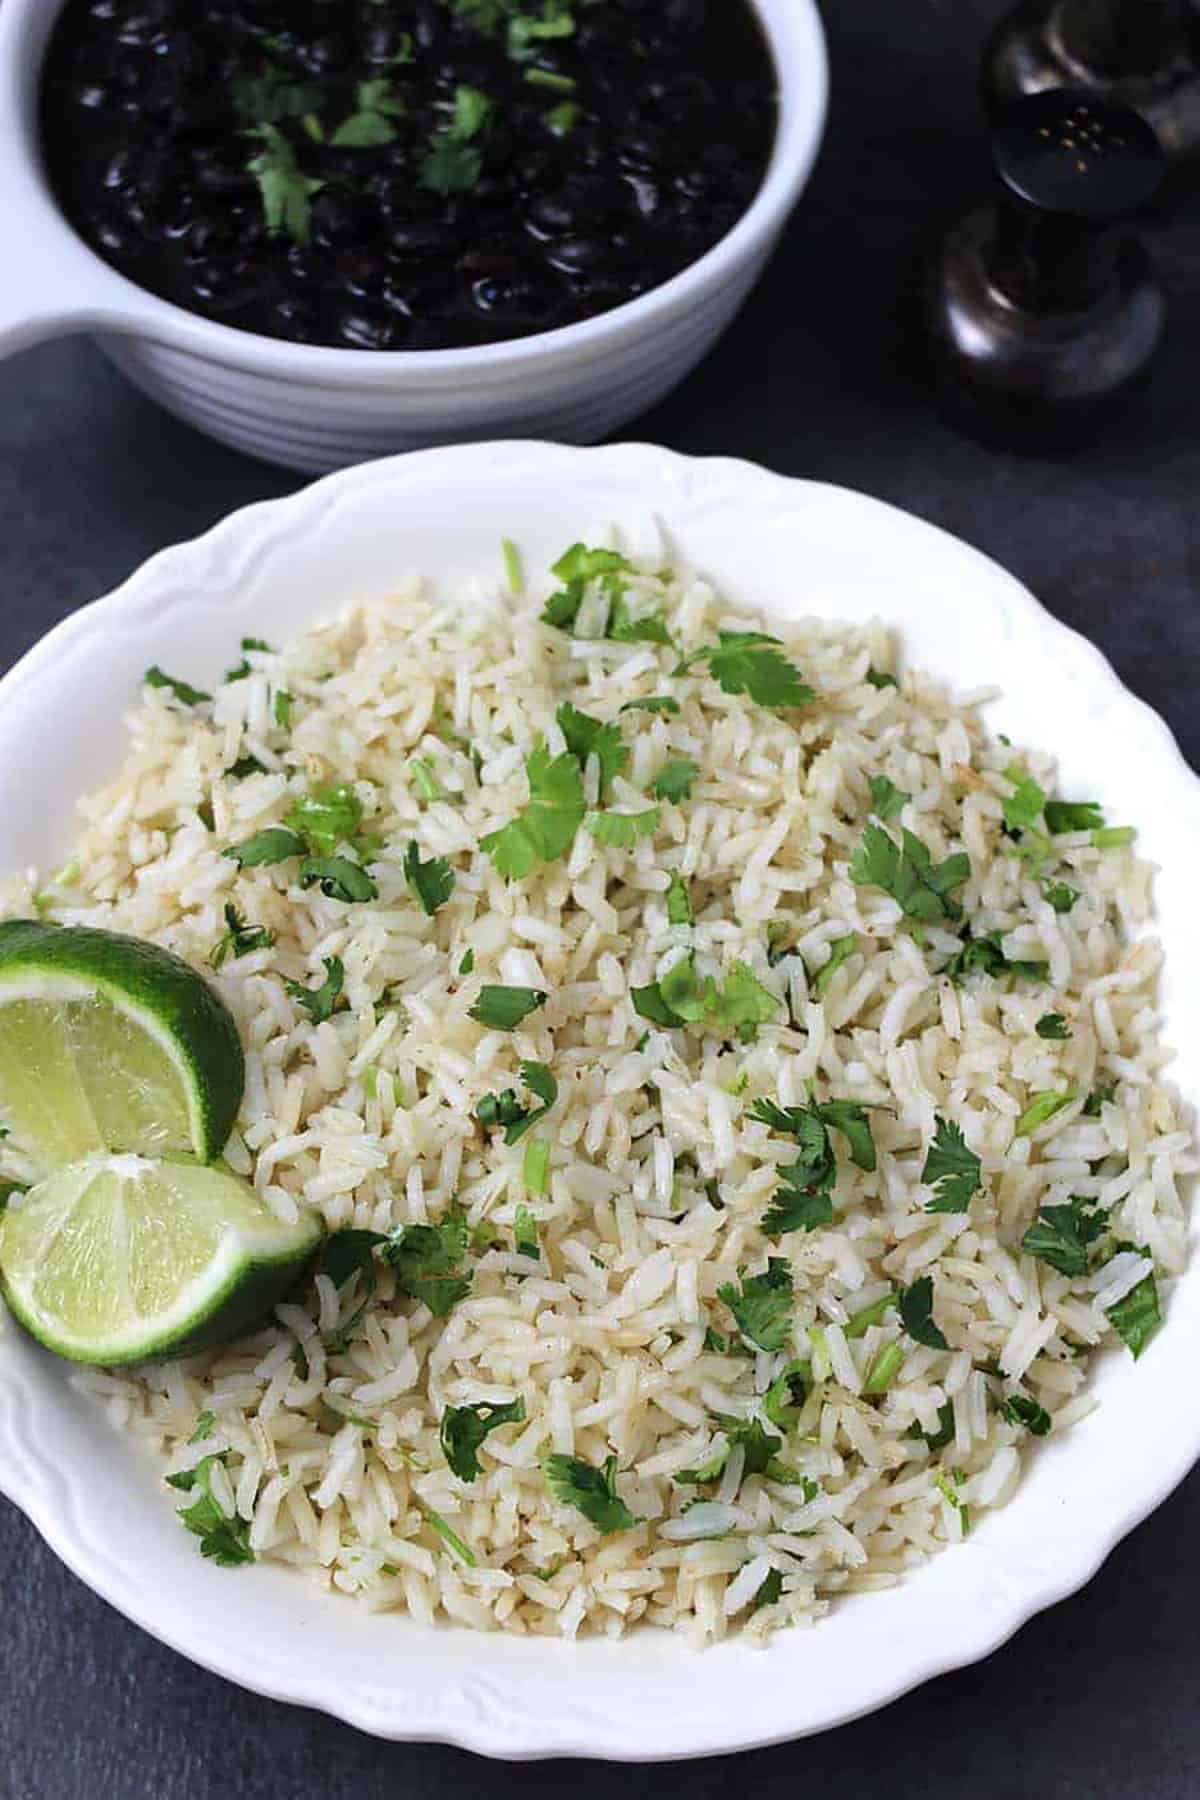 Best Cilantro Lime Rice Recipe (authentic and easy to make) - Better than chipotle rice. 